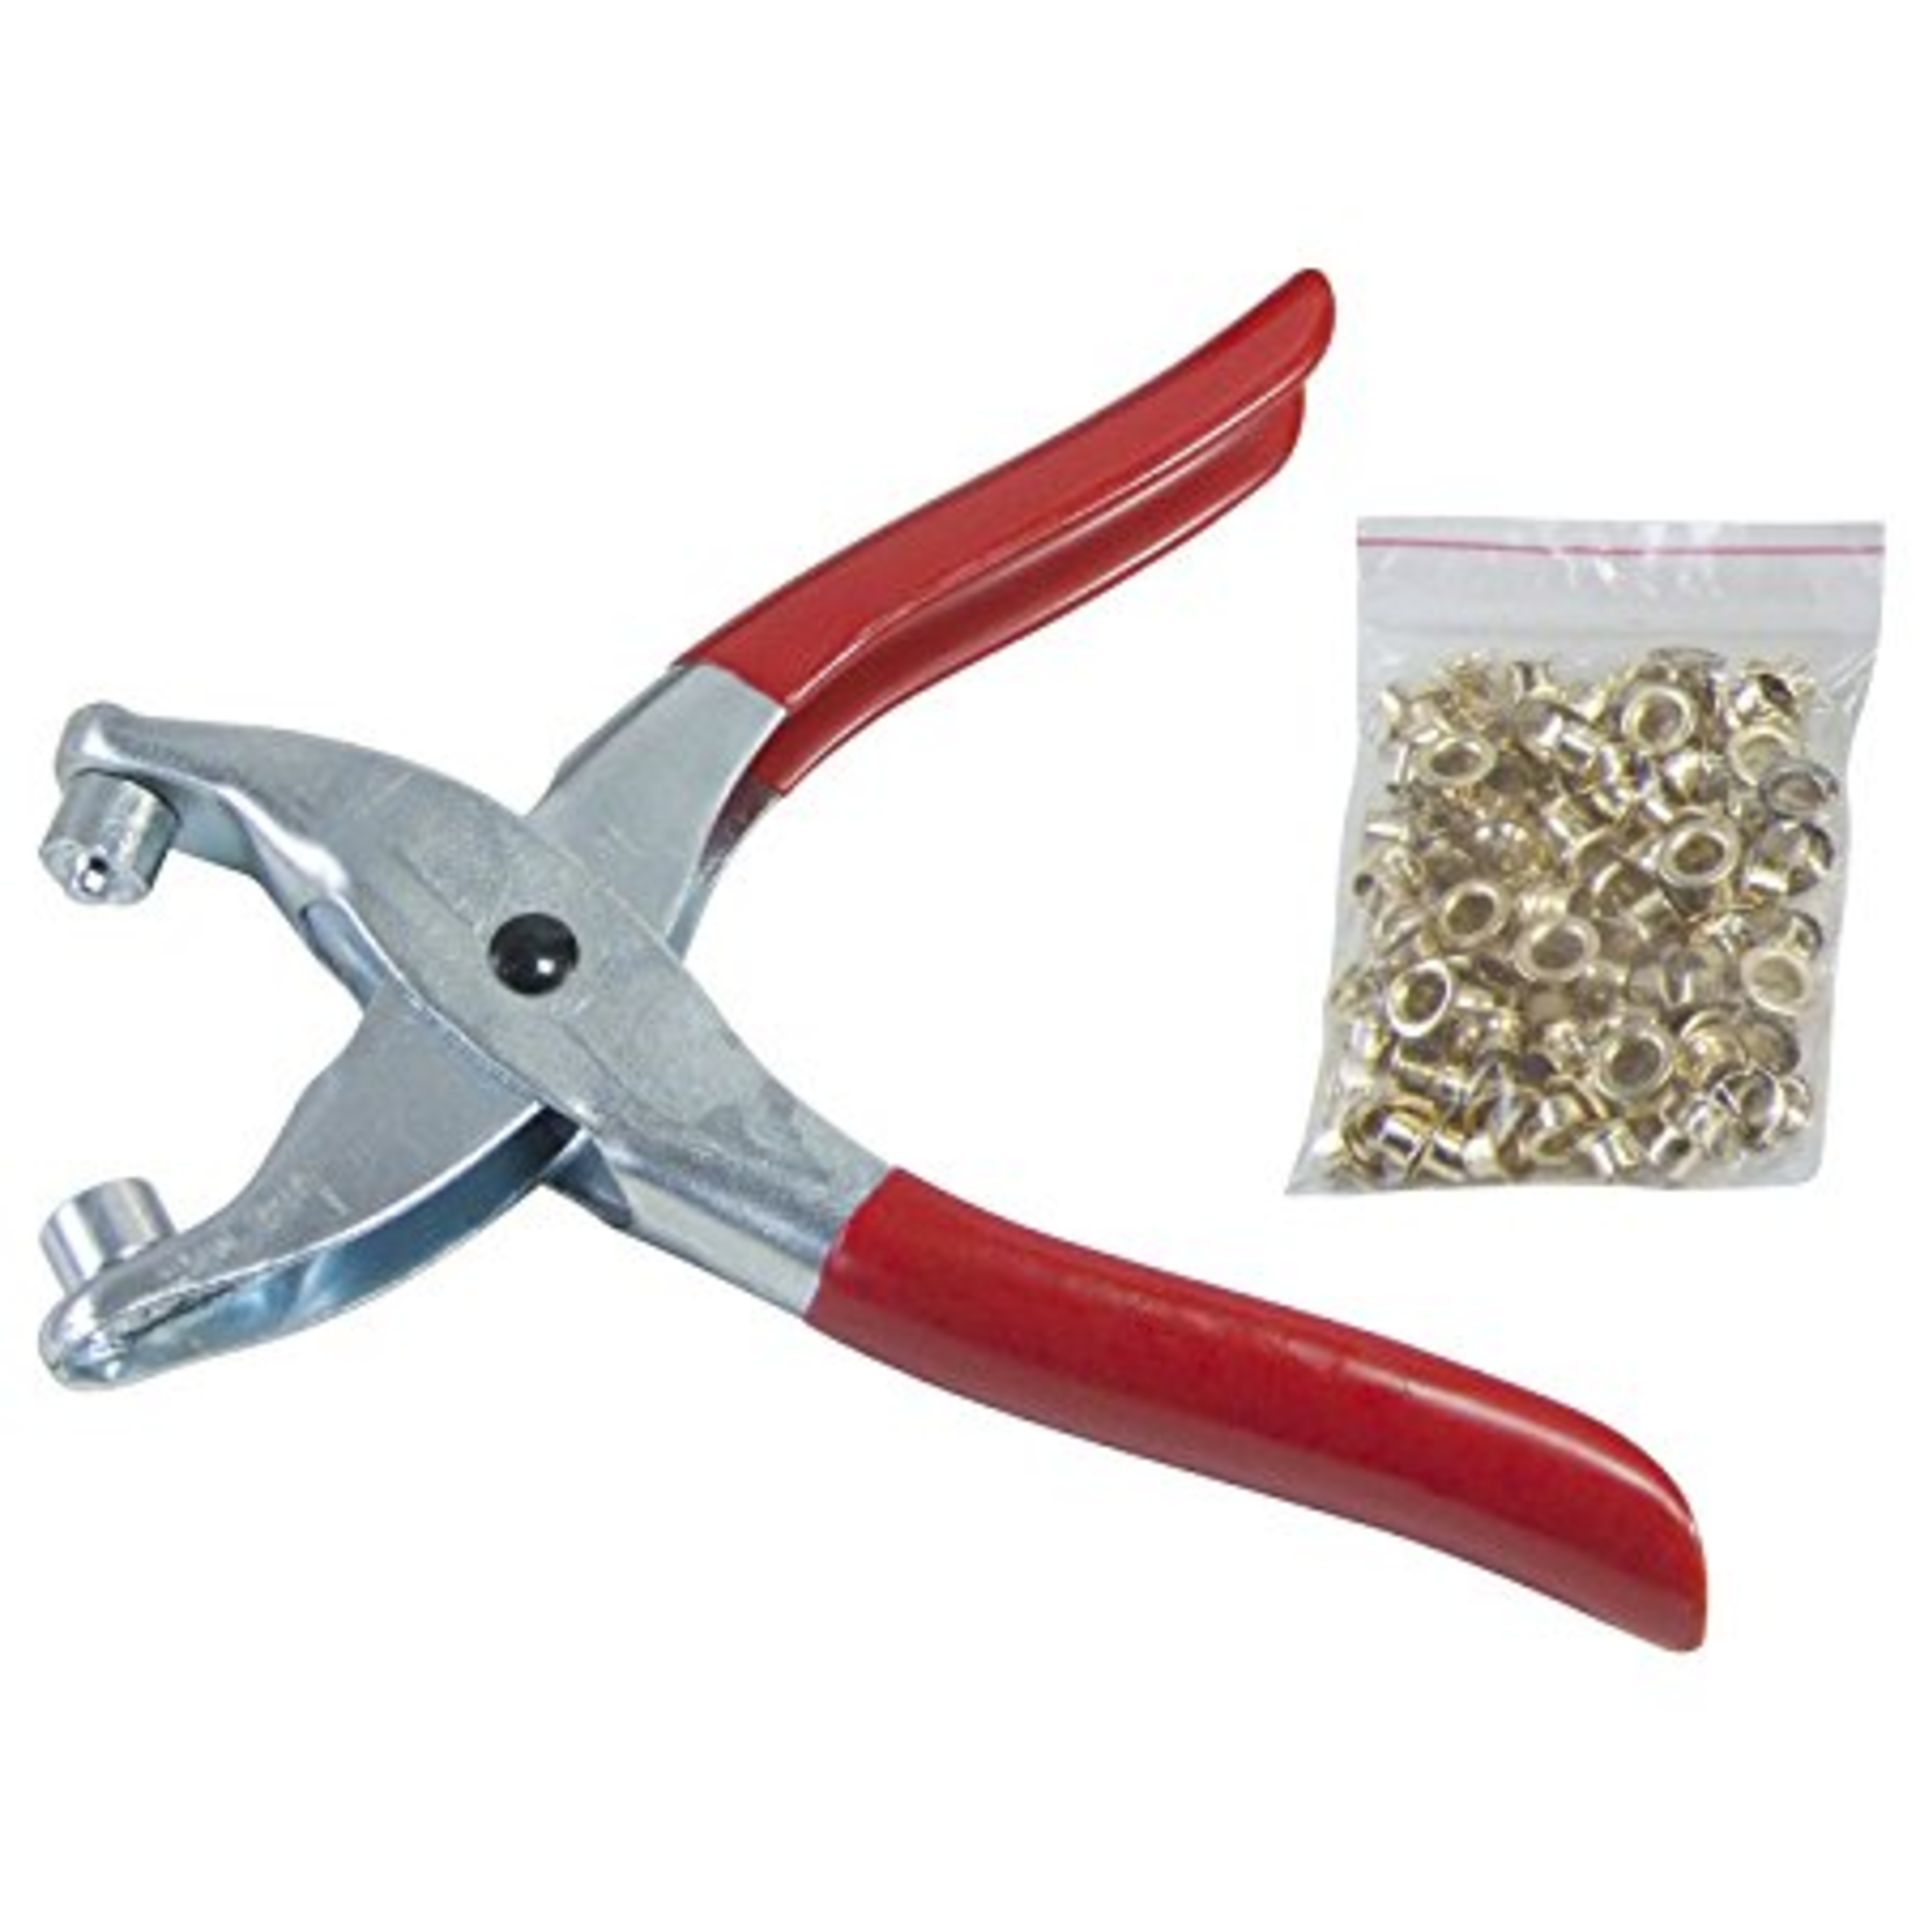 + VAT Brand New Eyelet Plier With Eyelets - Lightweight Steel Construction - Spring Loaded For Ease